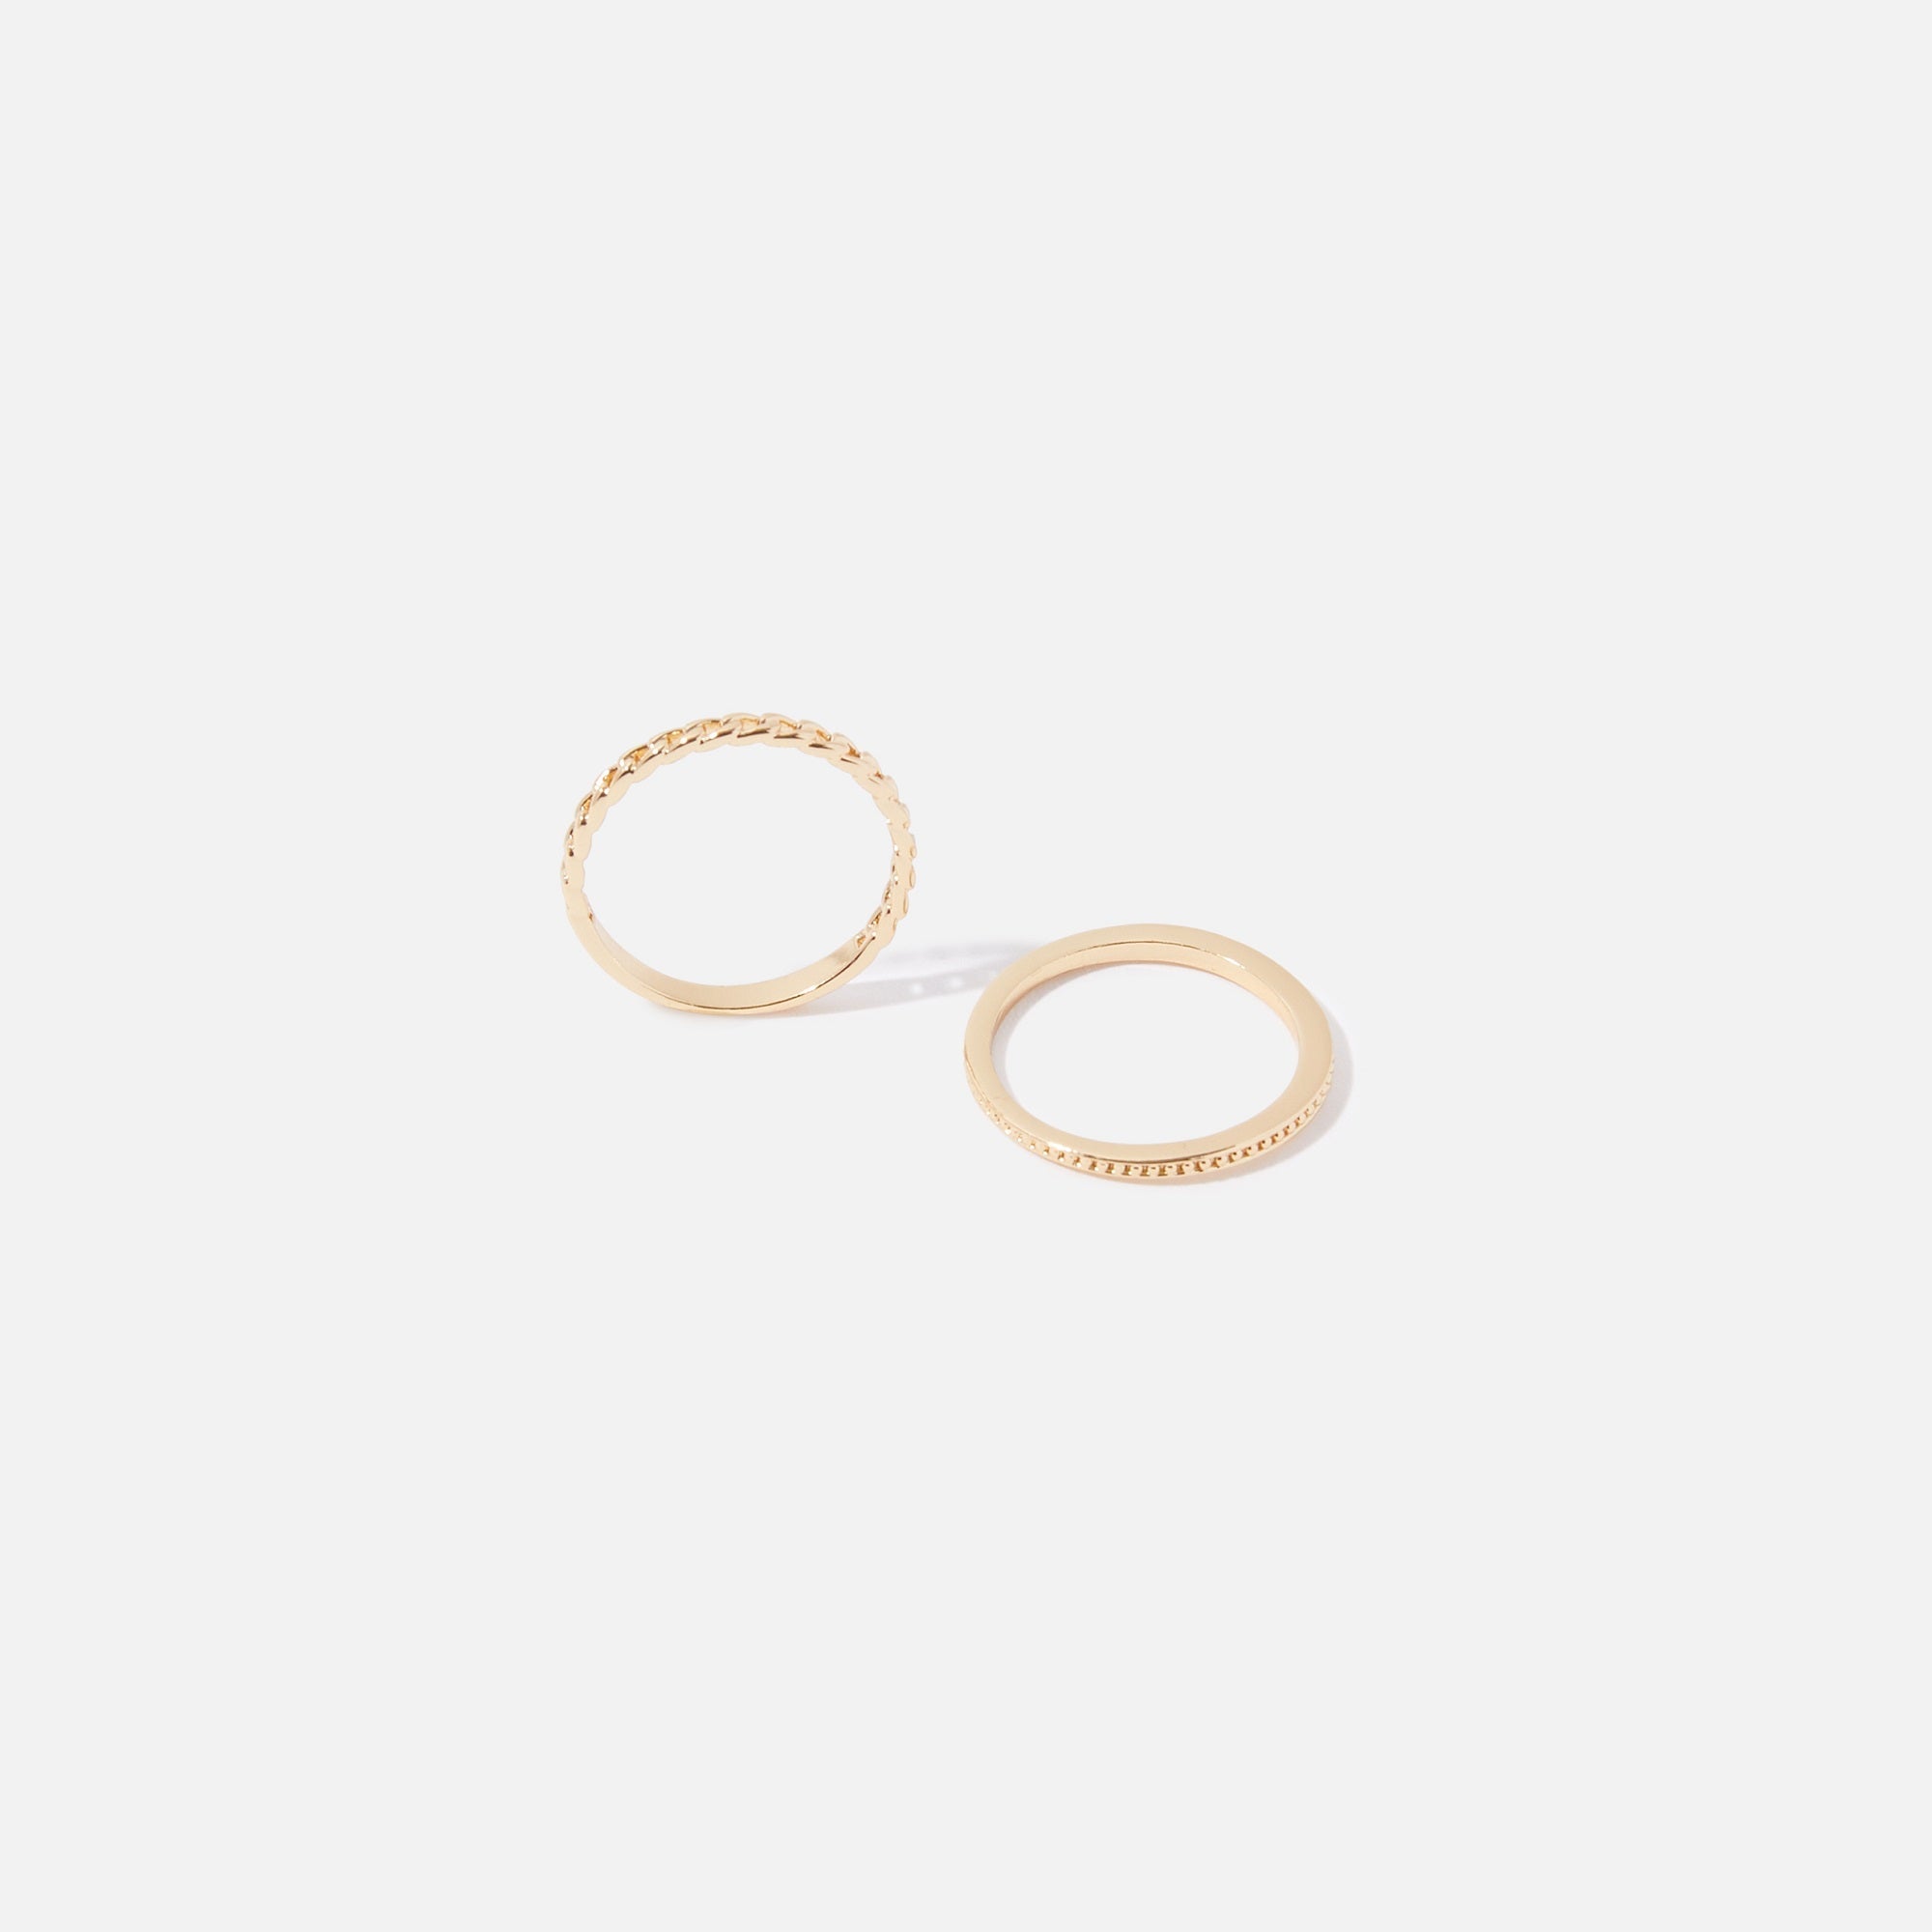 Real Gold Plated set of 2 Chain Stacking Rings For Women By Accessorize London